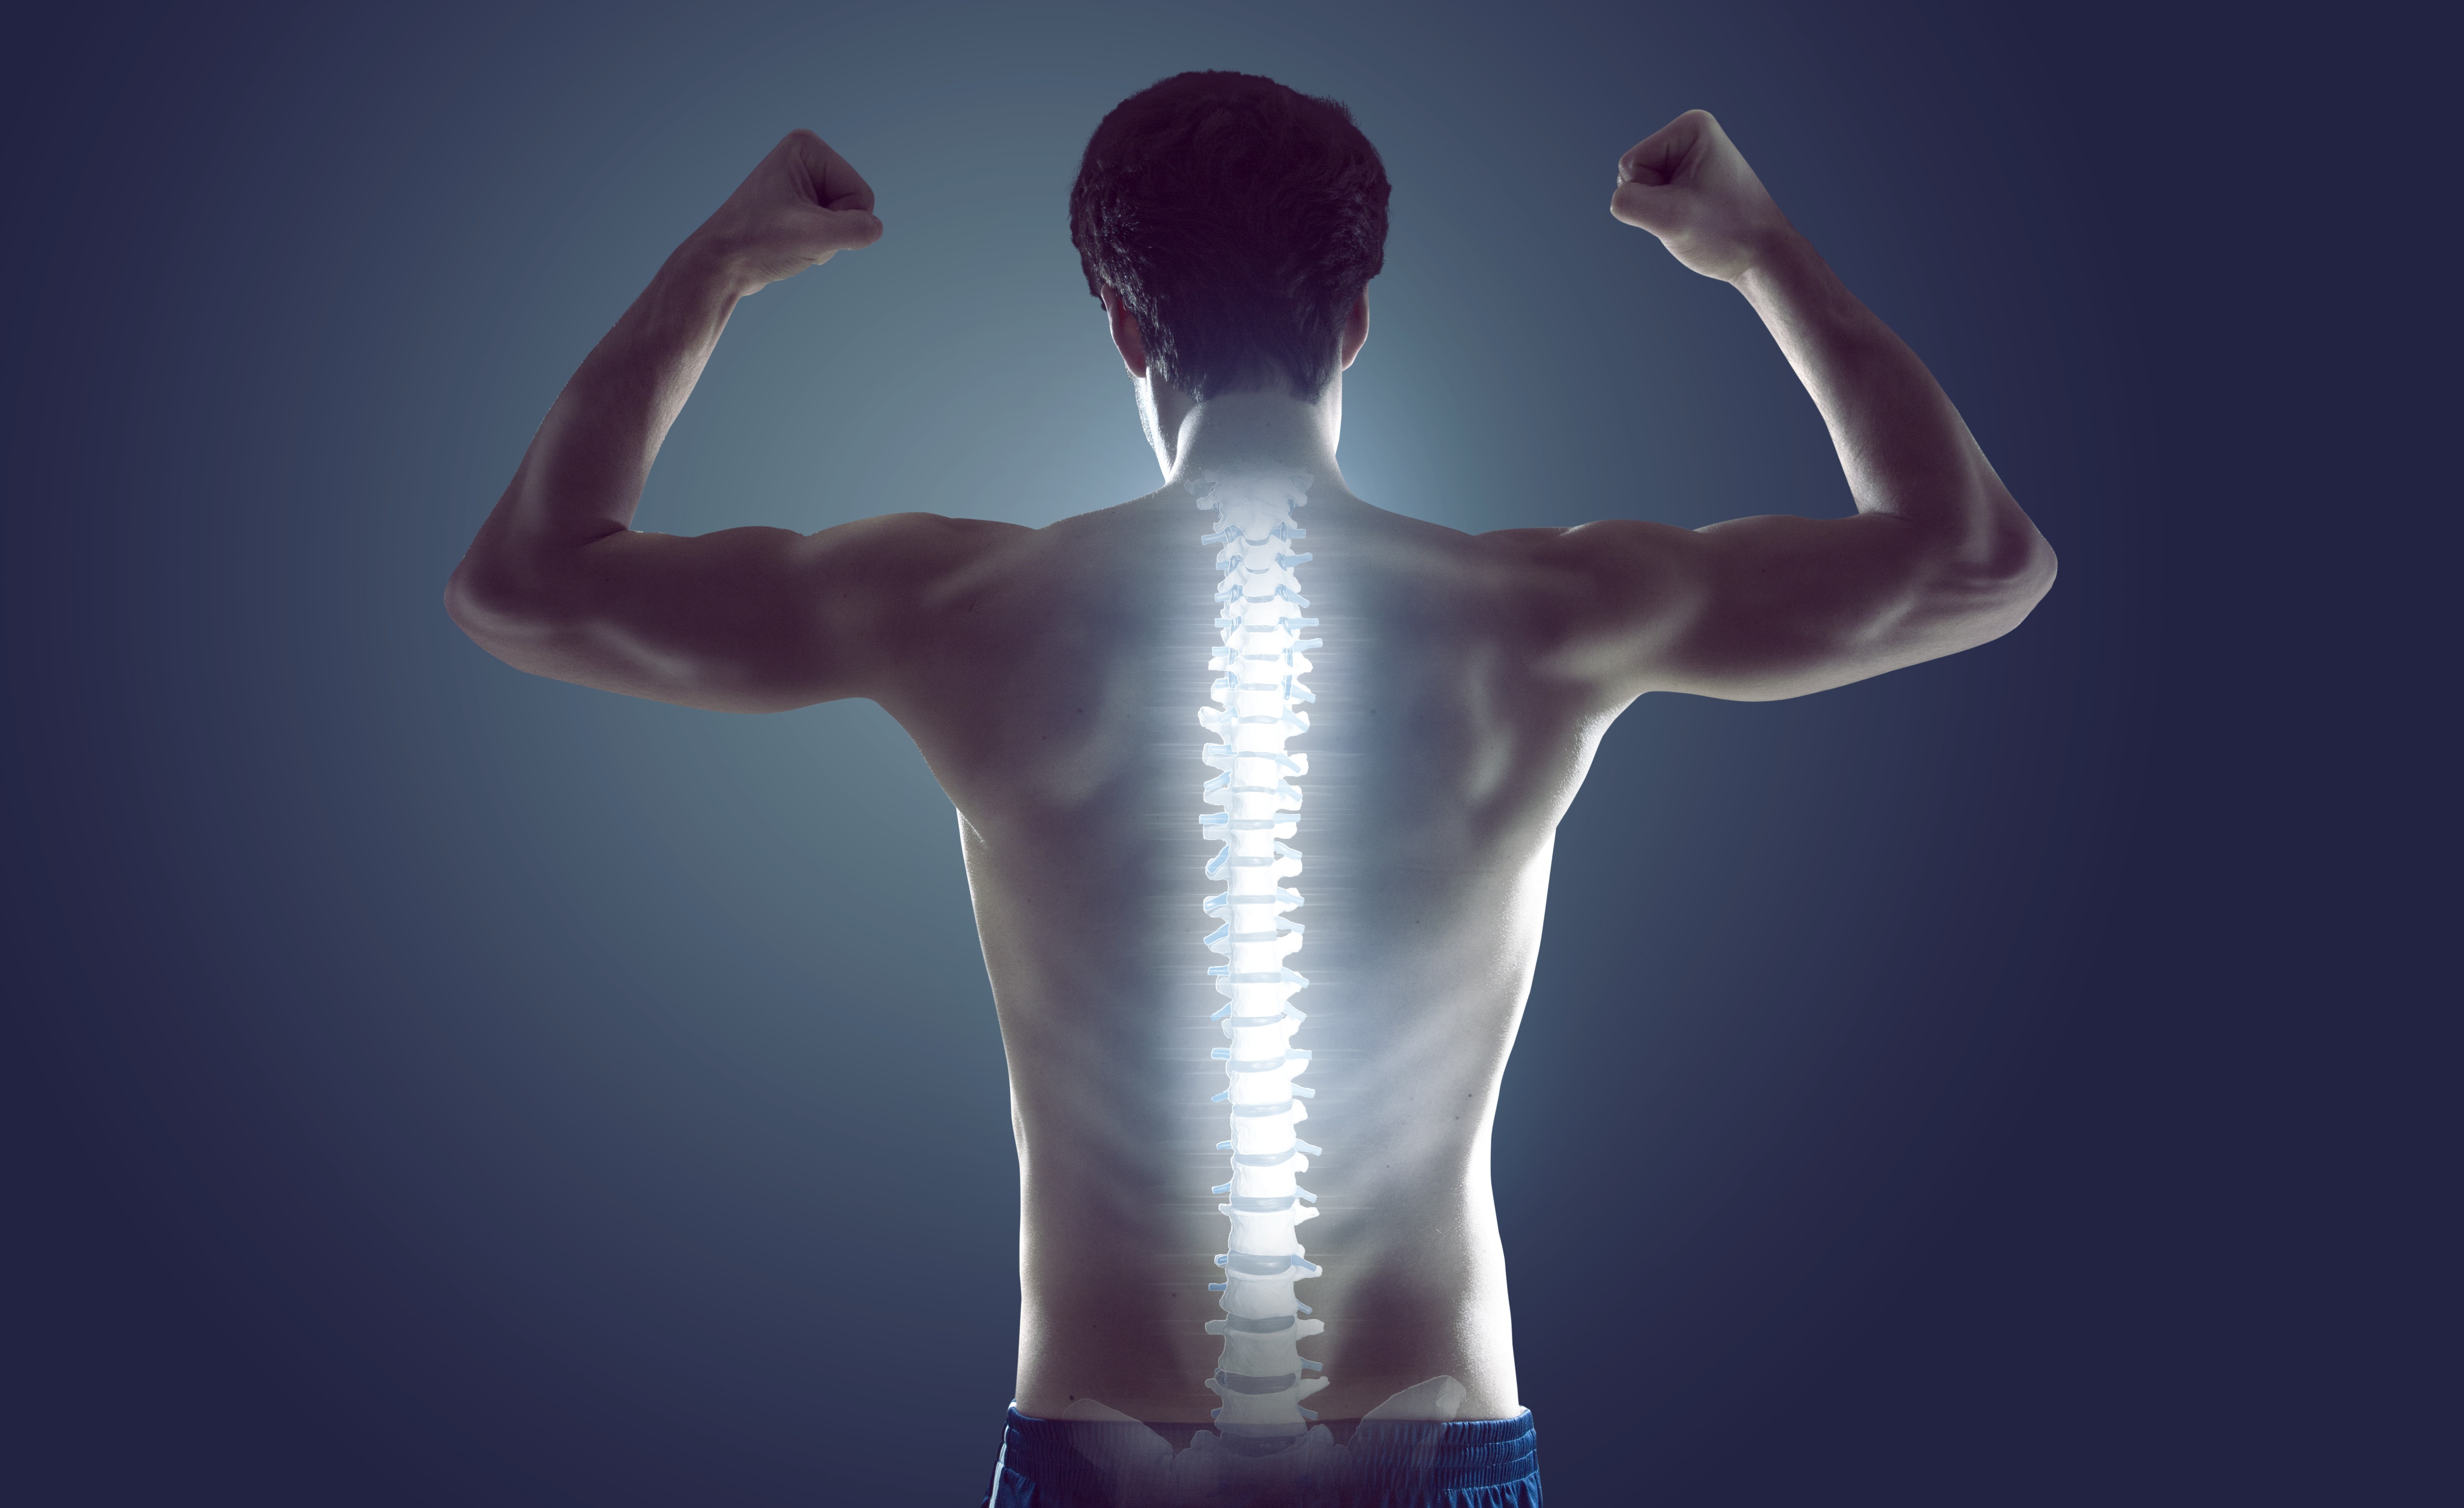 Improving your core strength will help maintain the health of your spine – shaped like a letter ‘S’ to provide balanced support for the head and upper body – which contains more than 100 joints. Photo: Shutterstock